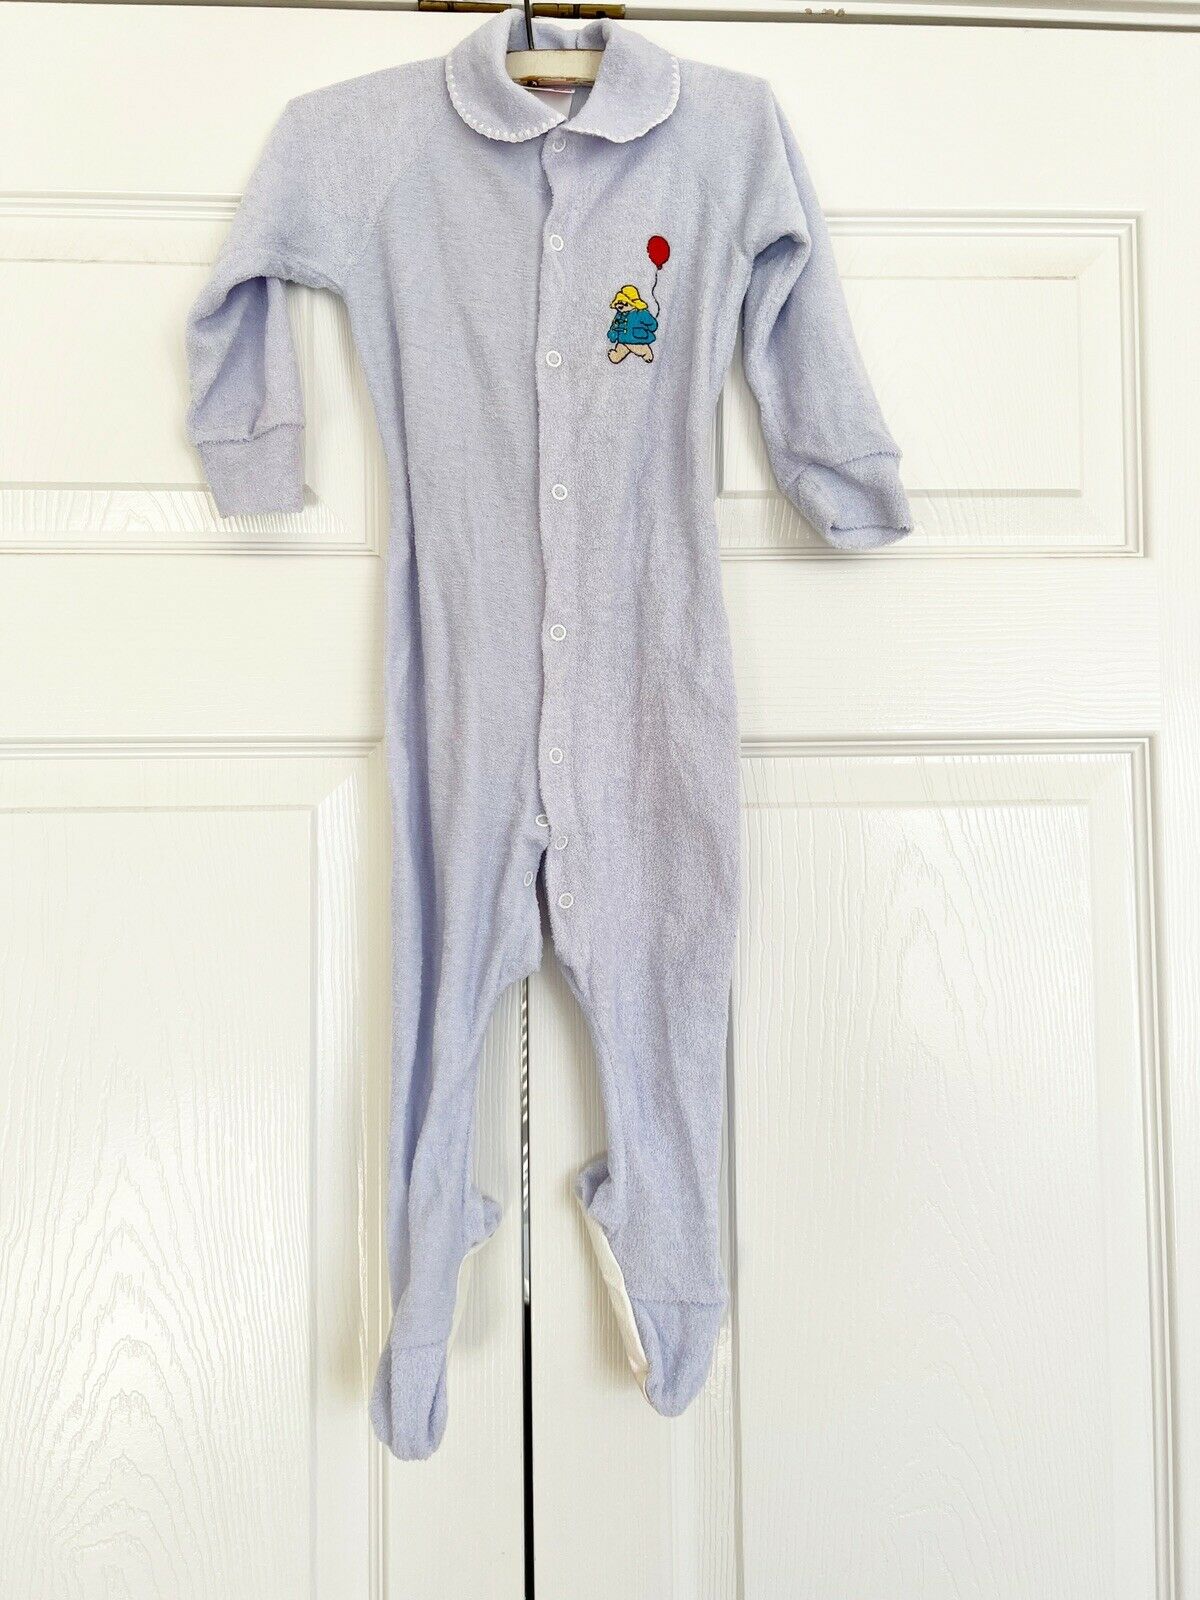 Vintage Paddington Bear One Piece Footed Terry Sleeper Lavender Baby 24 Months